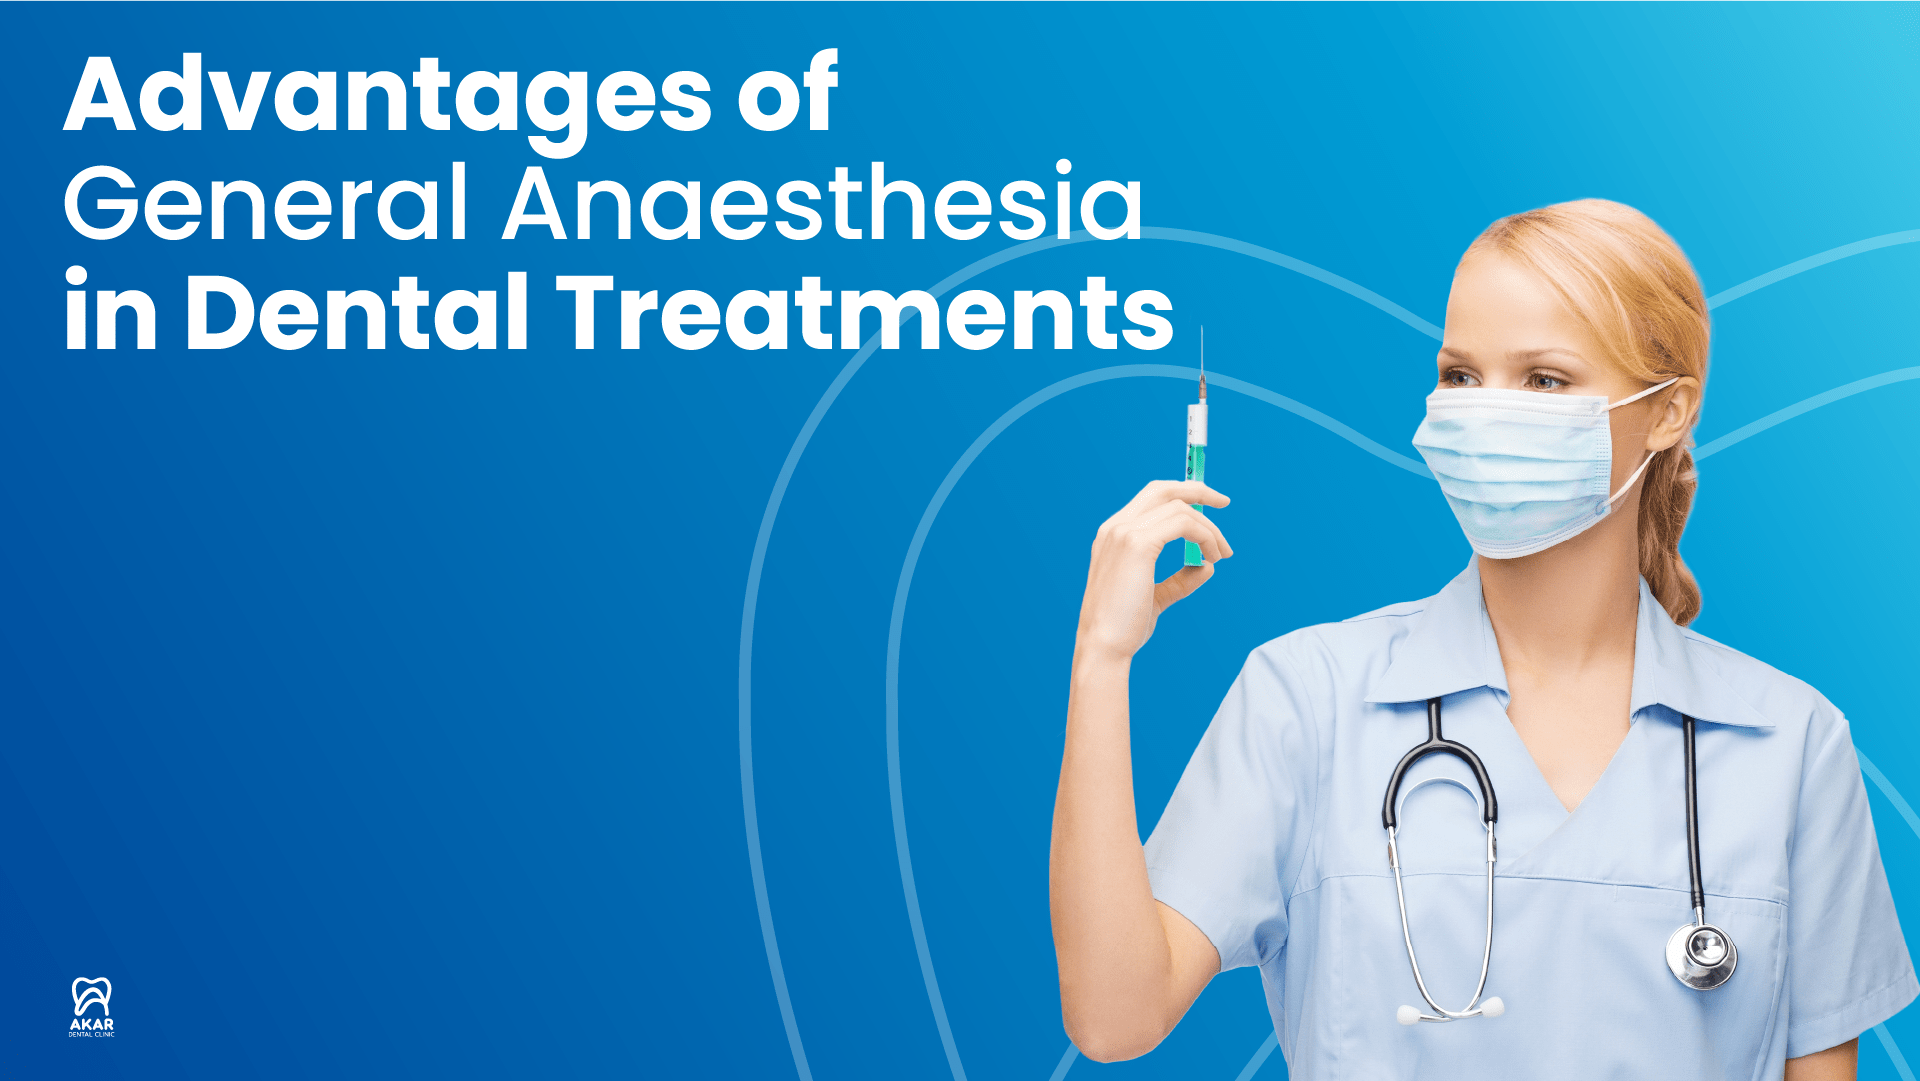 Advantages of General Anesthesia in Dental Treatments